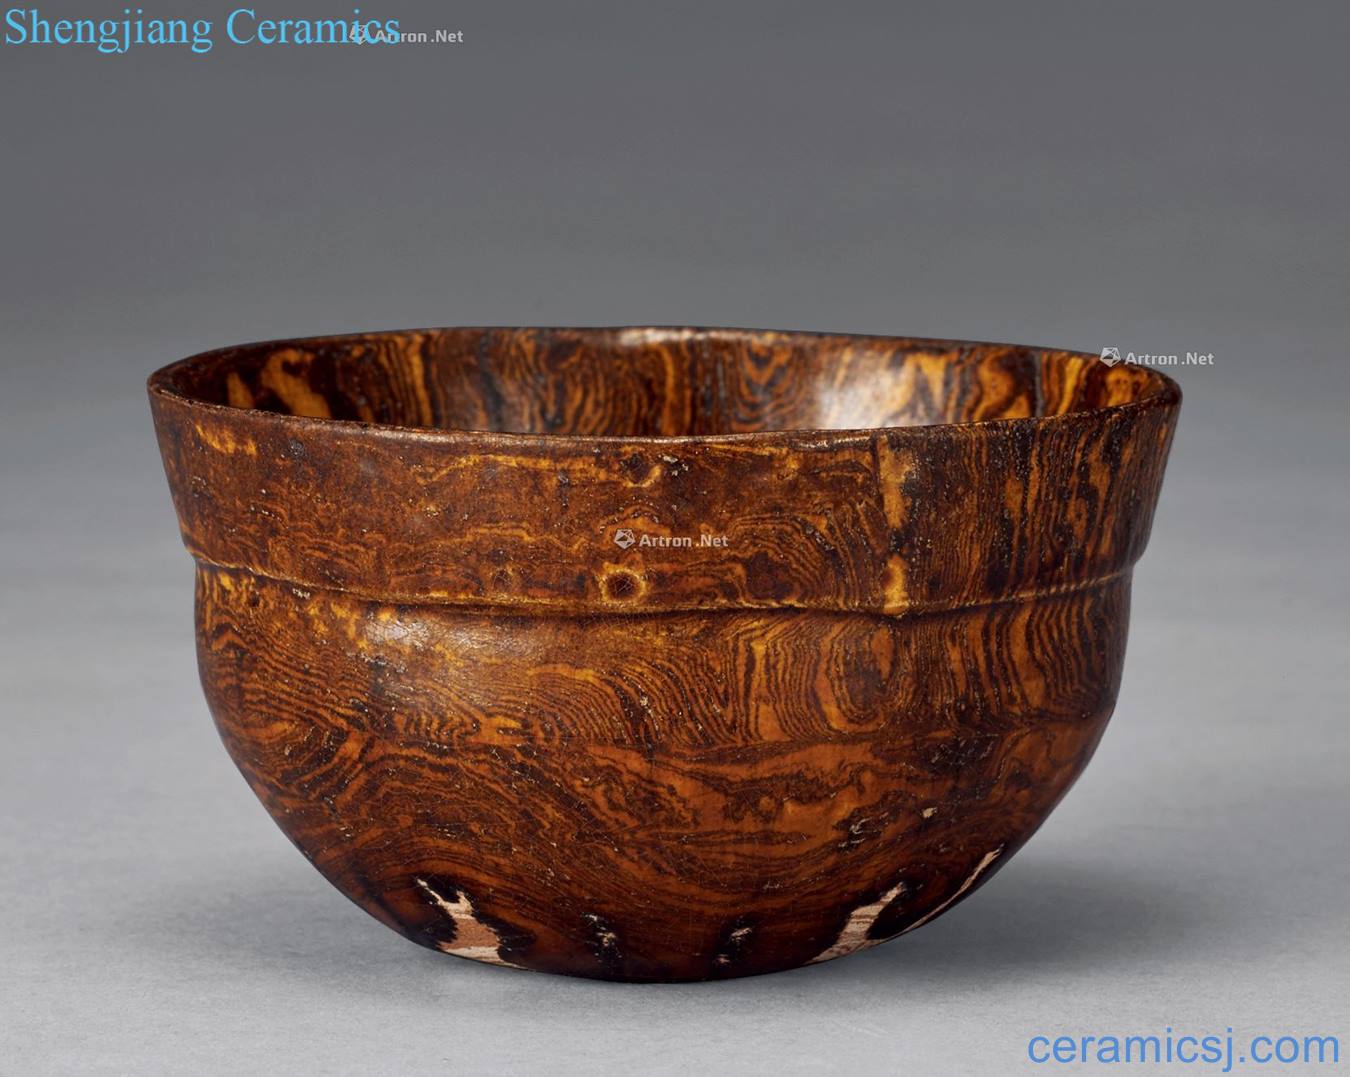 Song twisted placenta bowl